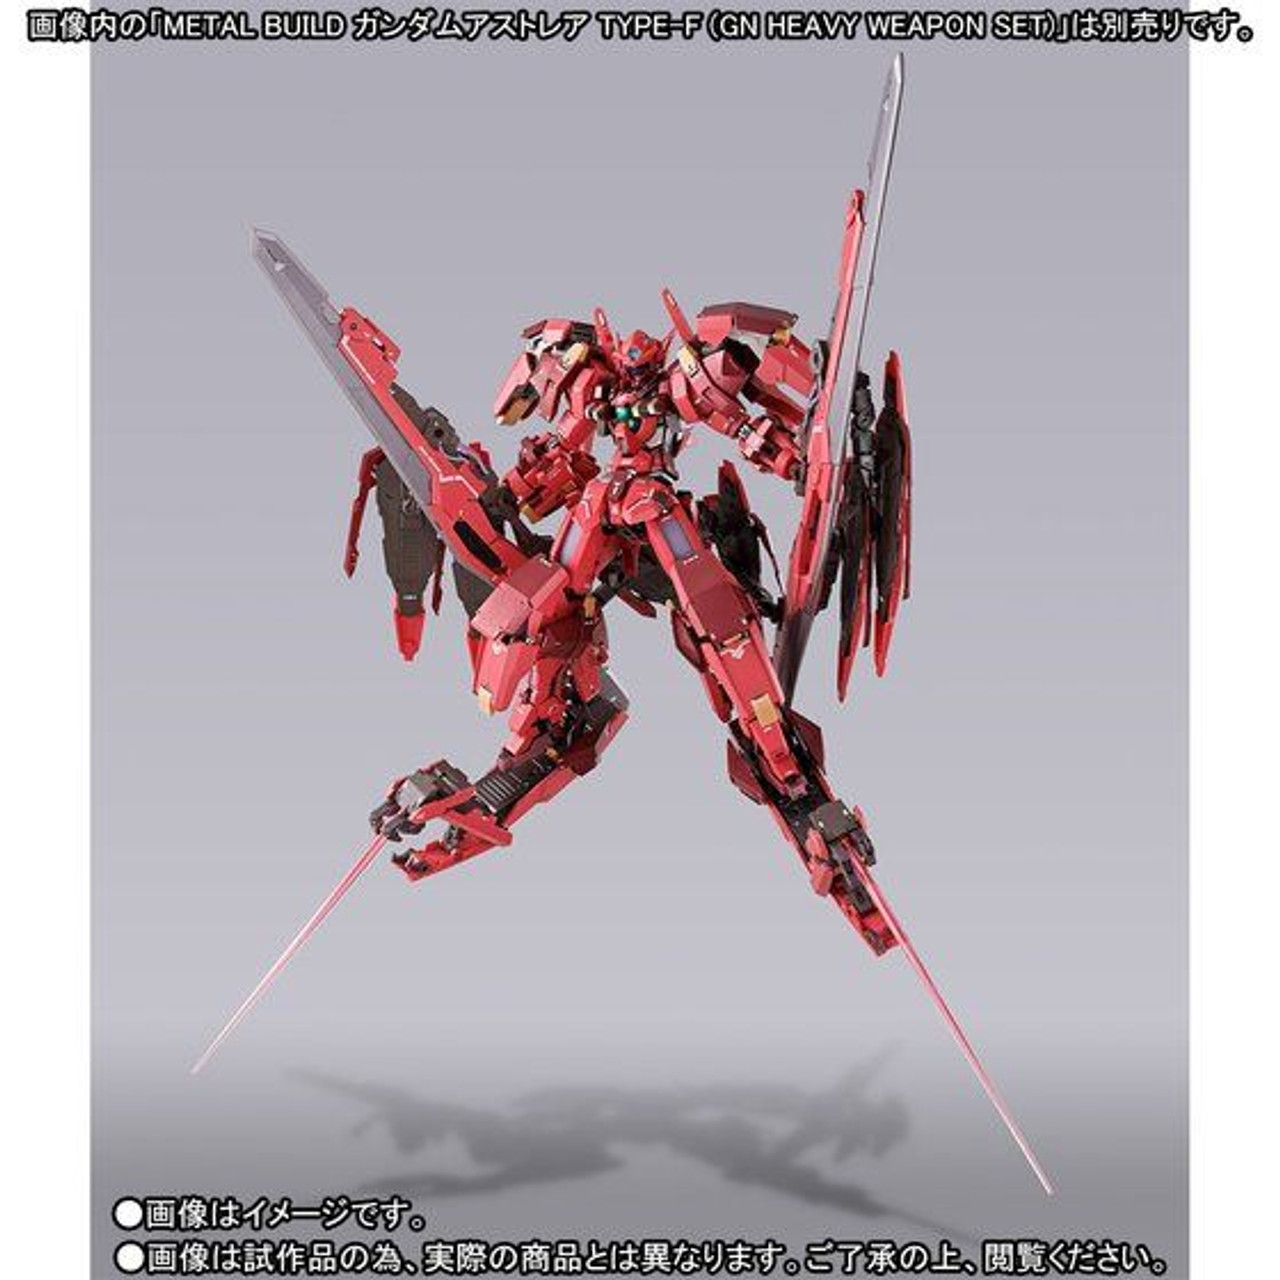 METAL BUILD Avalung OP Set for (Gundam Avalanche Astraea TYPE-F)